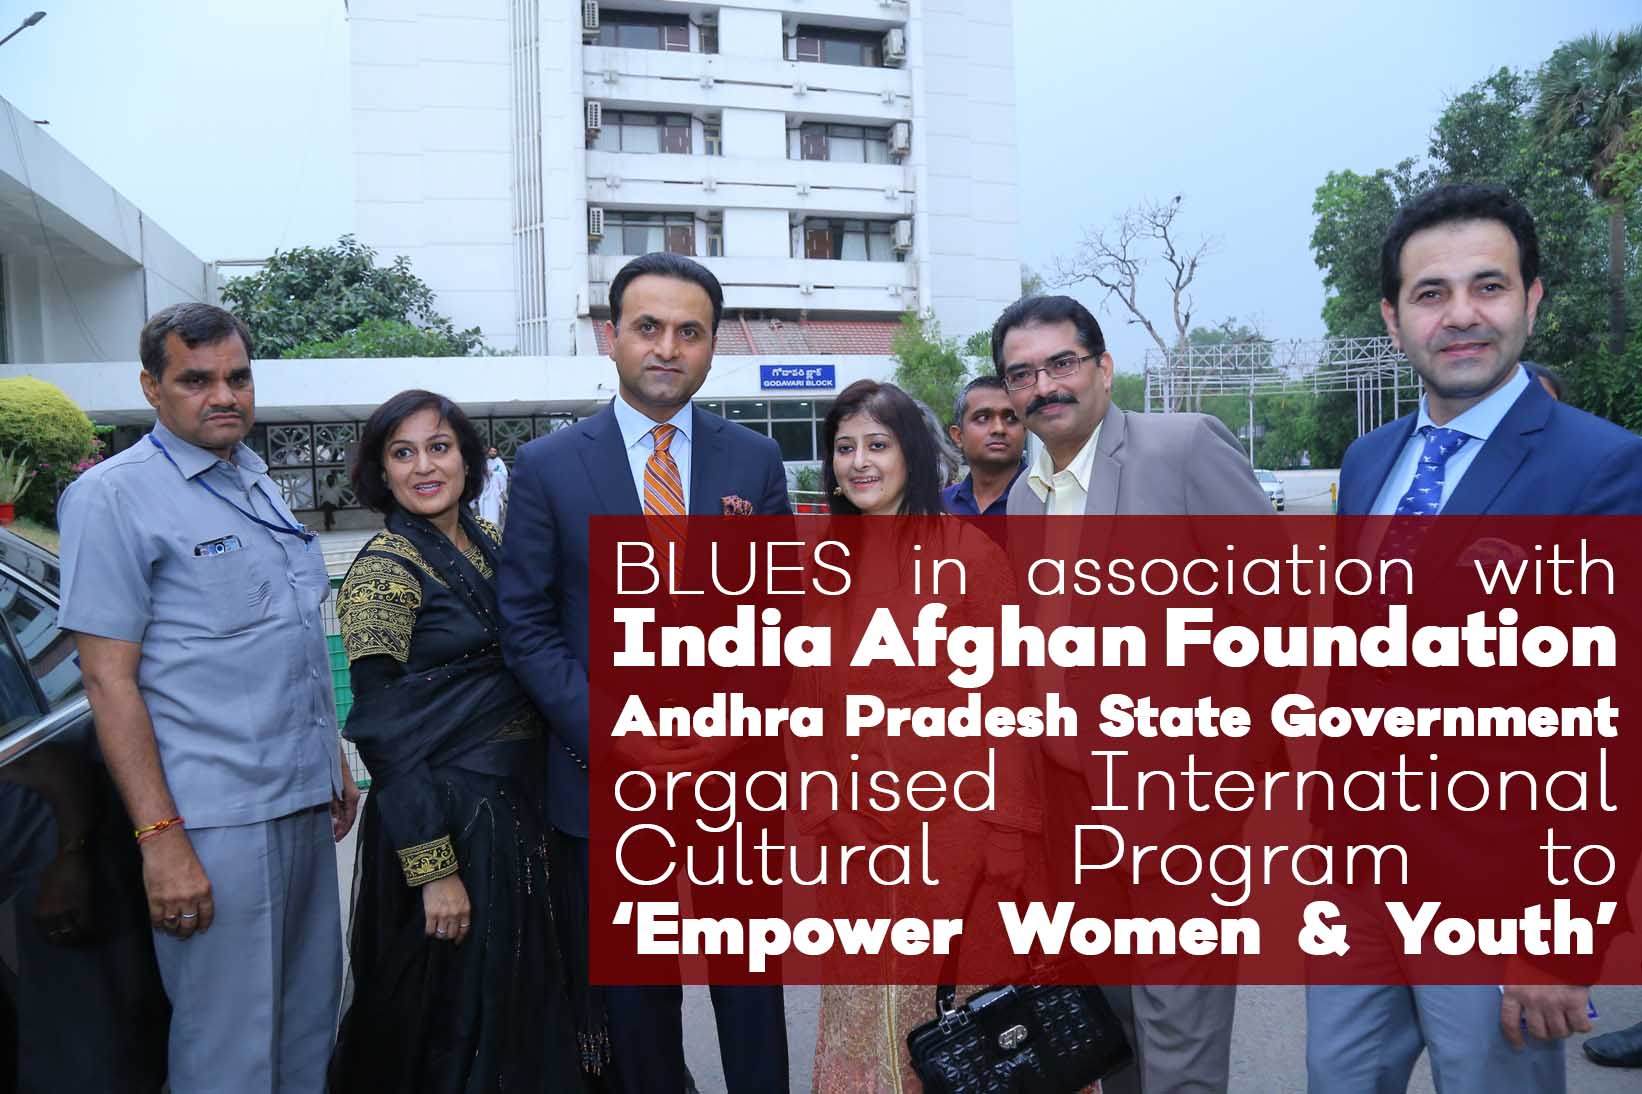 BLUES in association with India Afghan Foundation Andhra Pradesh State Government organised International Cultural Program to ‘Empower Women & Youth’